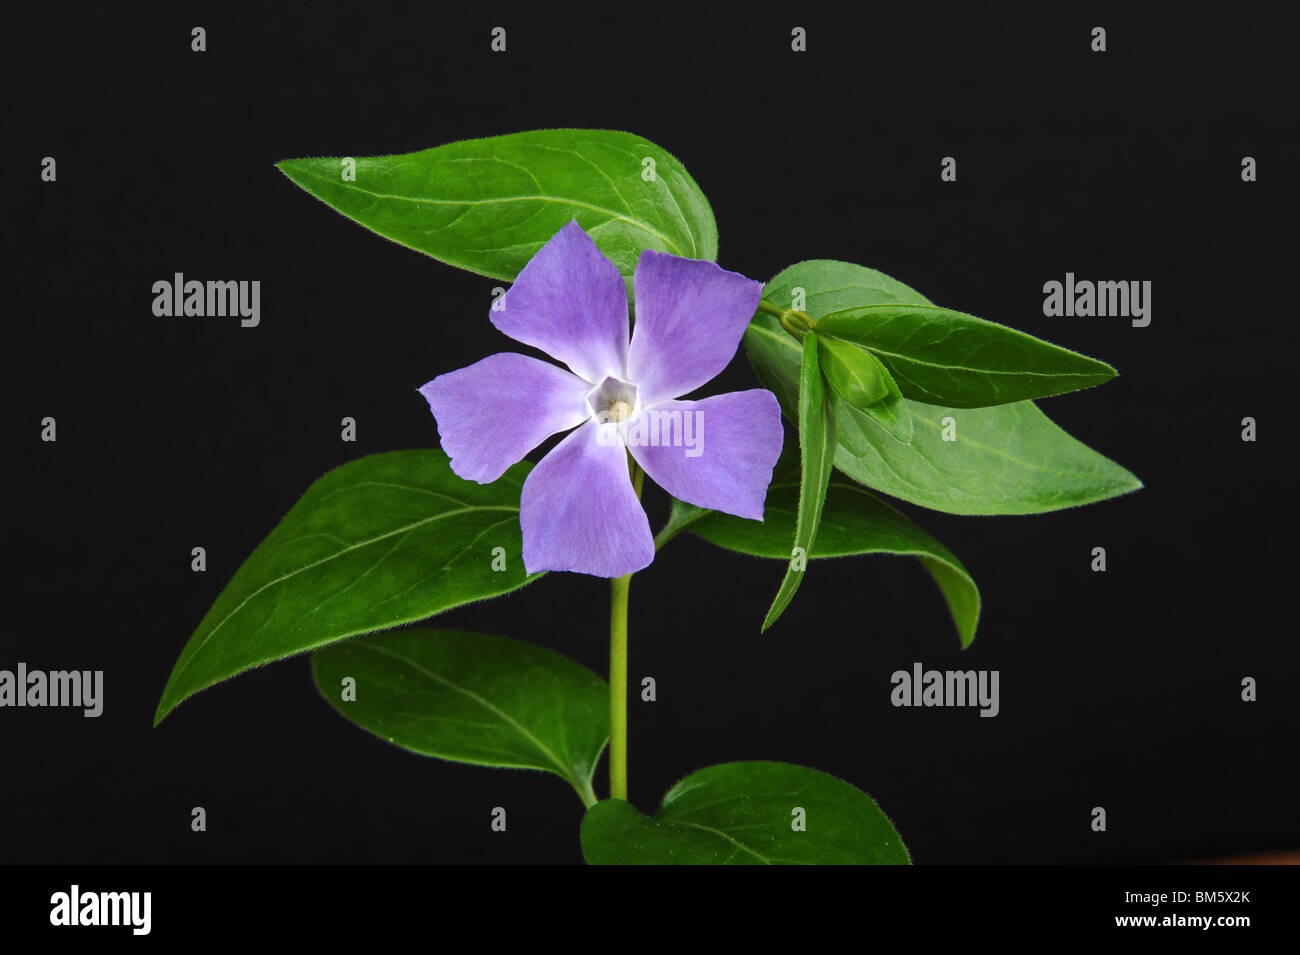 Vinca major commonly known as Large Periwinkle and Greater Periwinkle and Blue Periwinkle Stock Photo